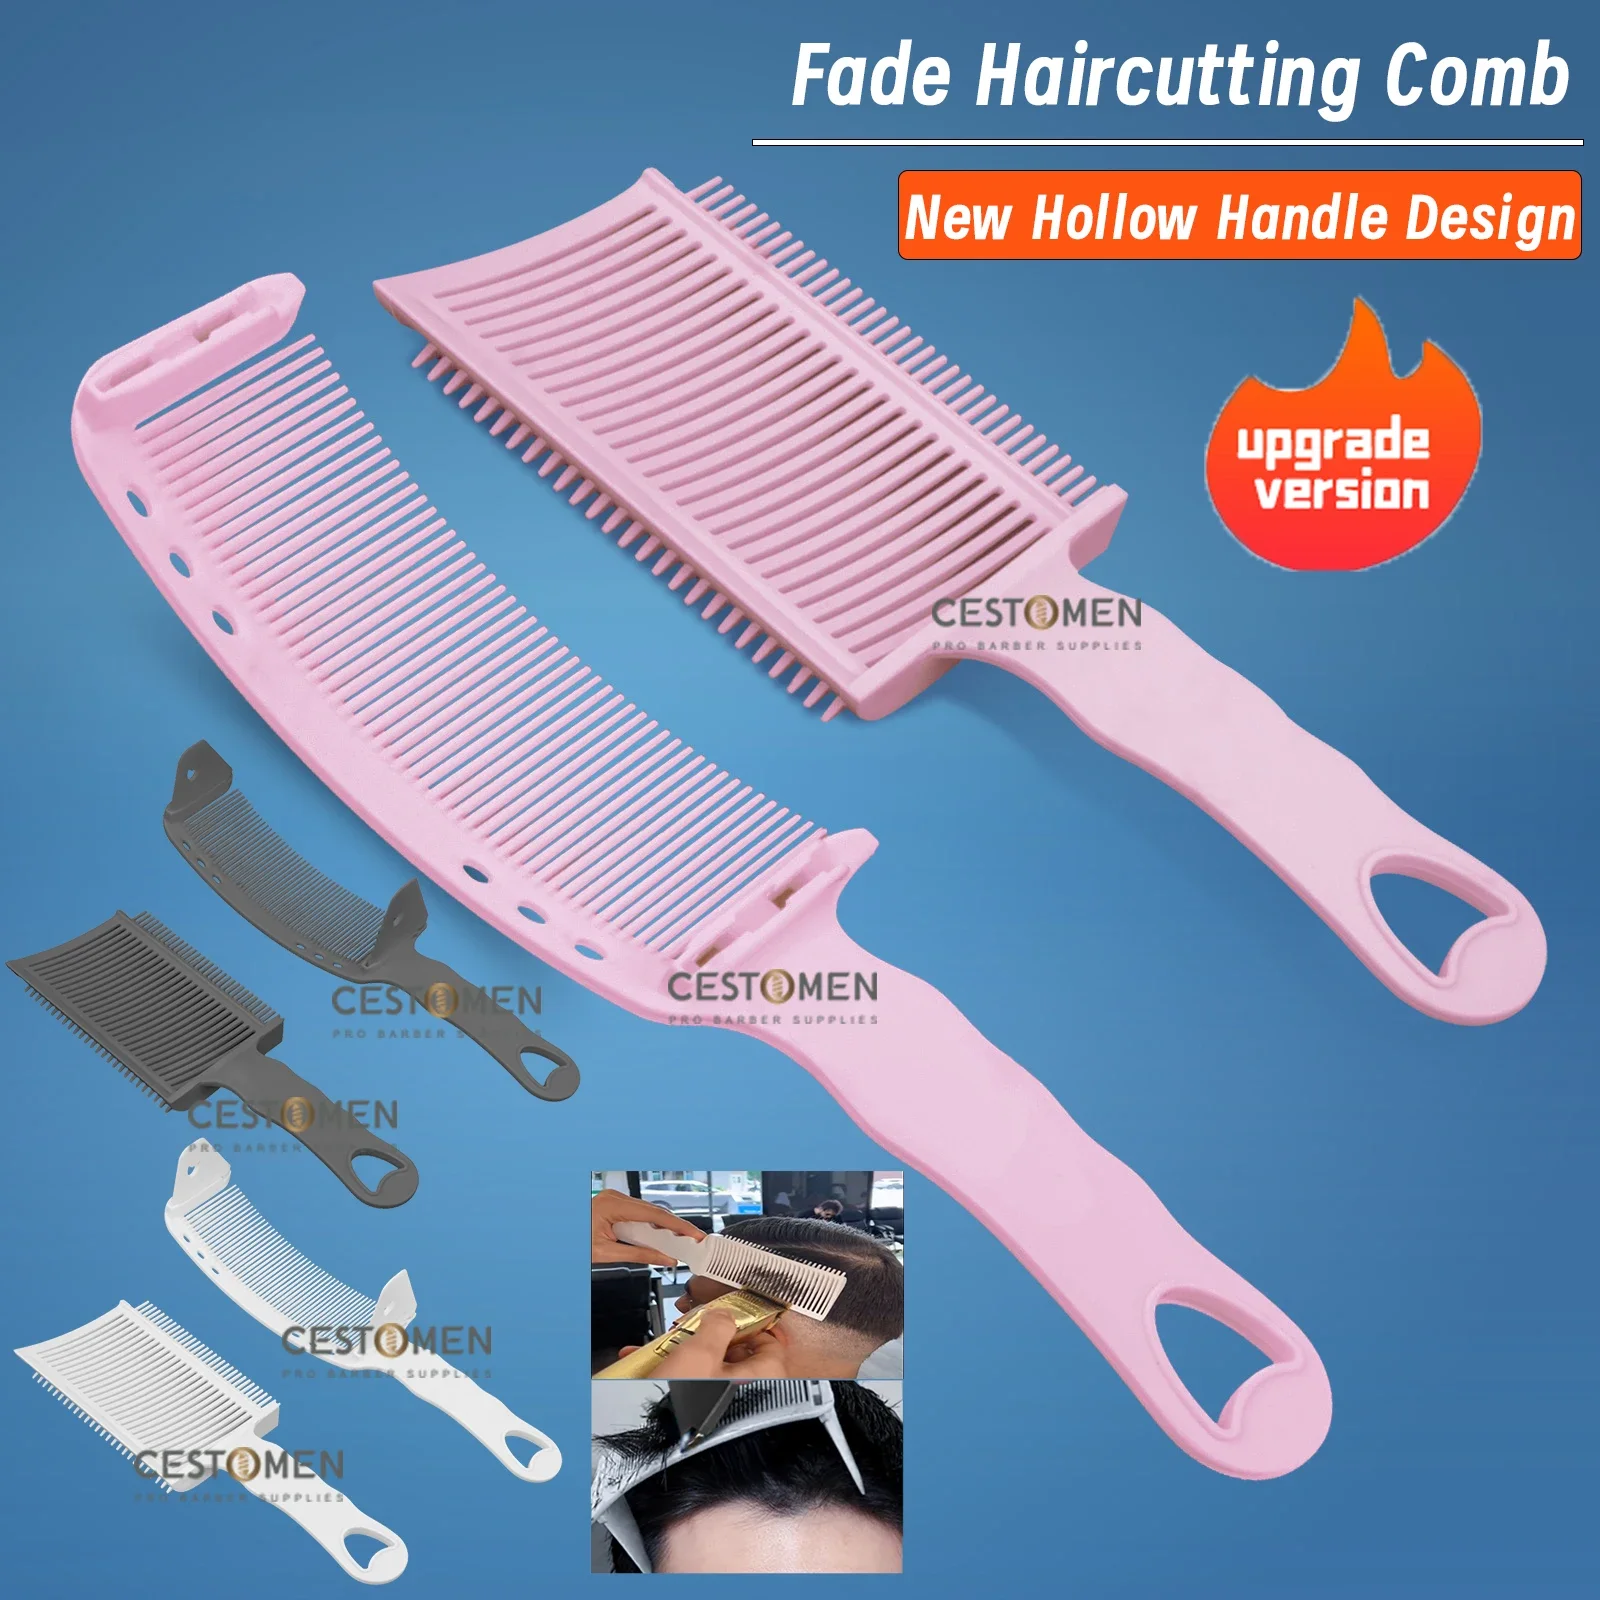 New Style Fading Comb Professional Barber Clipper Blending Flat Top Hair Cutting Comb For Men Heat Resistant Salon Styling Tools